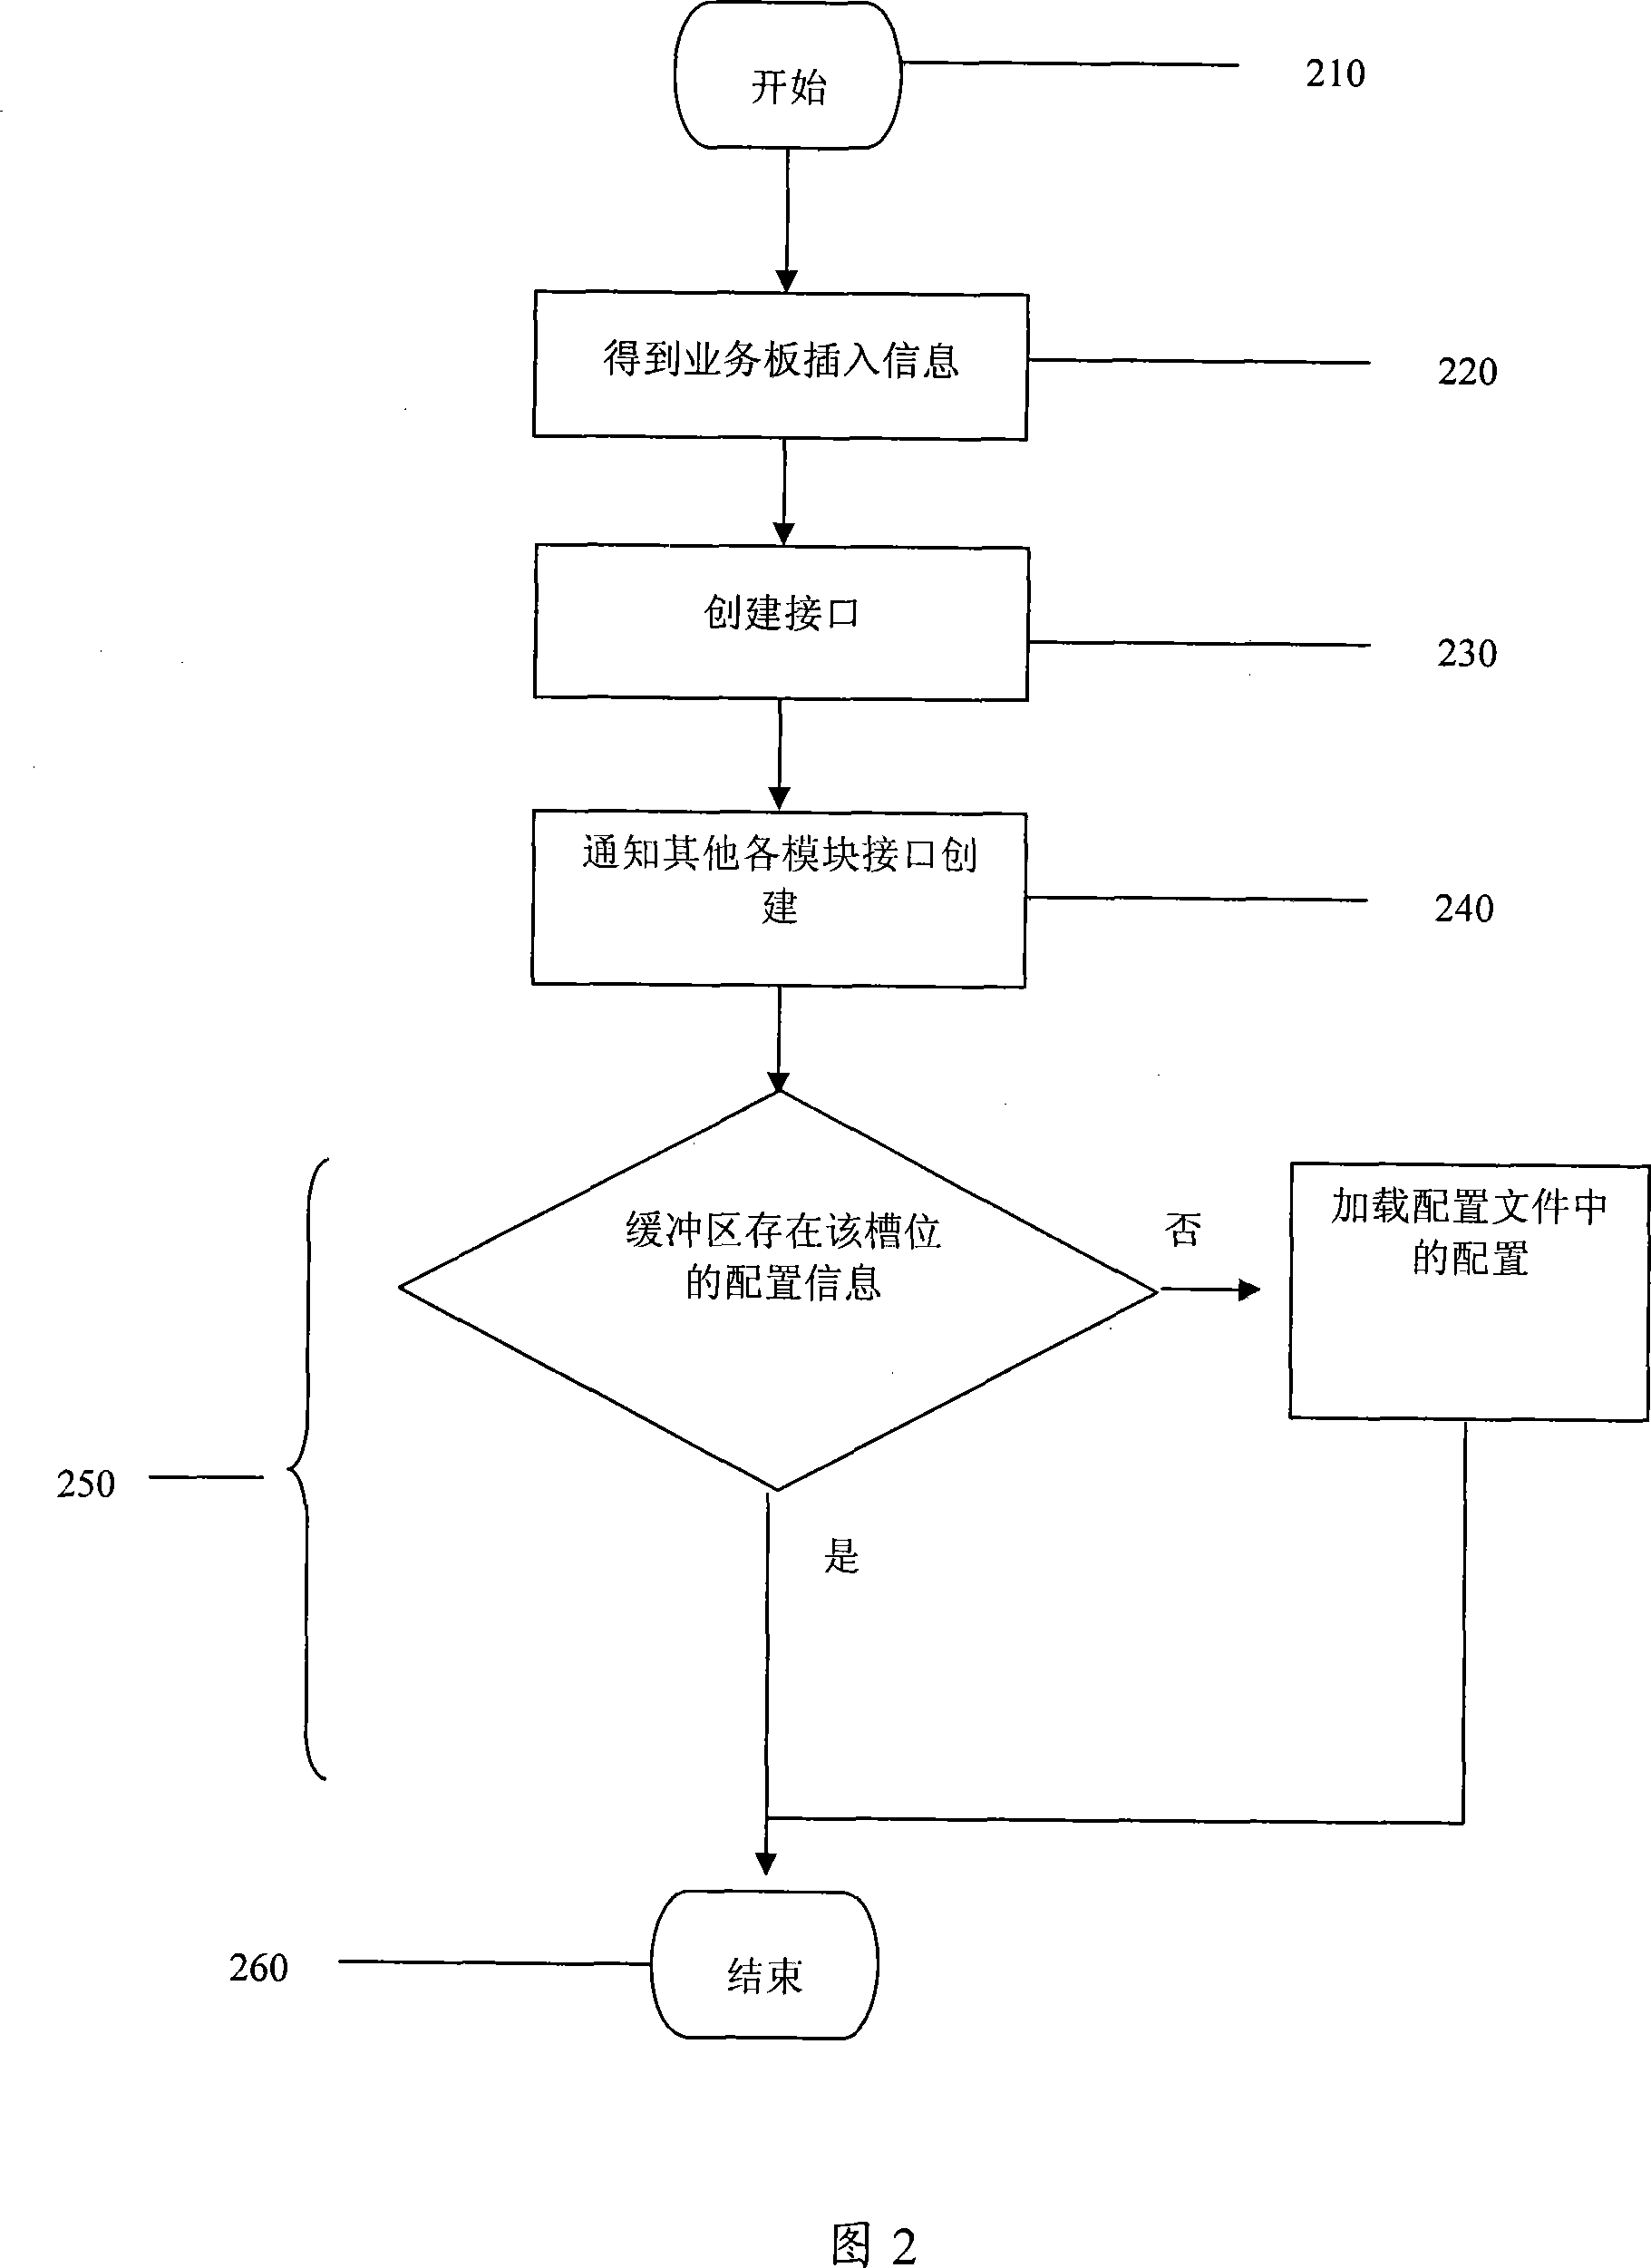 A hot plug configuration recovery method of rack device